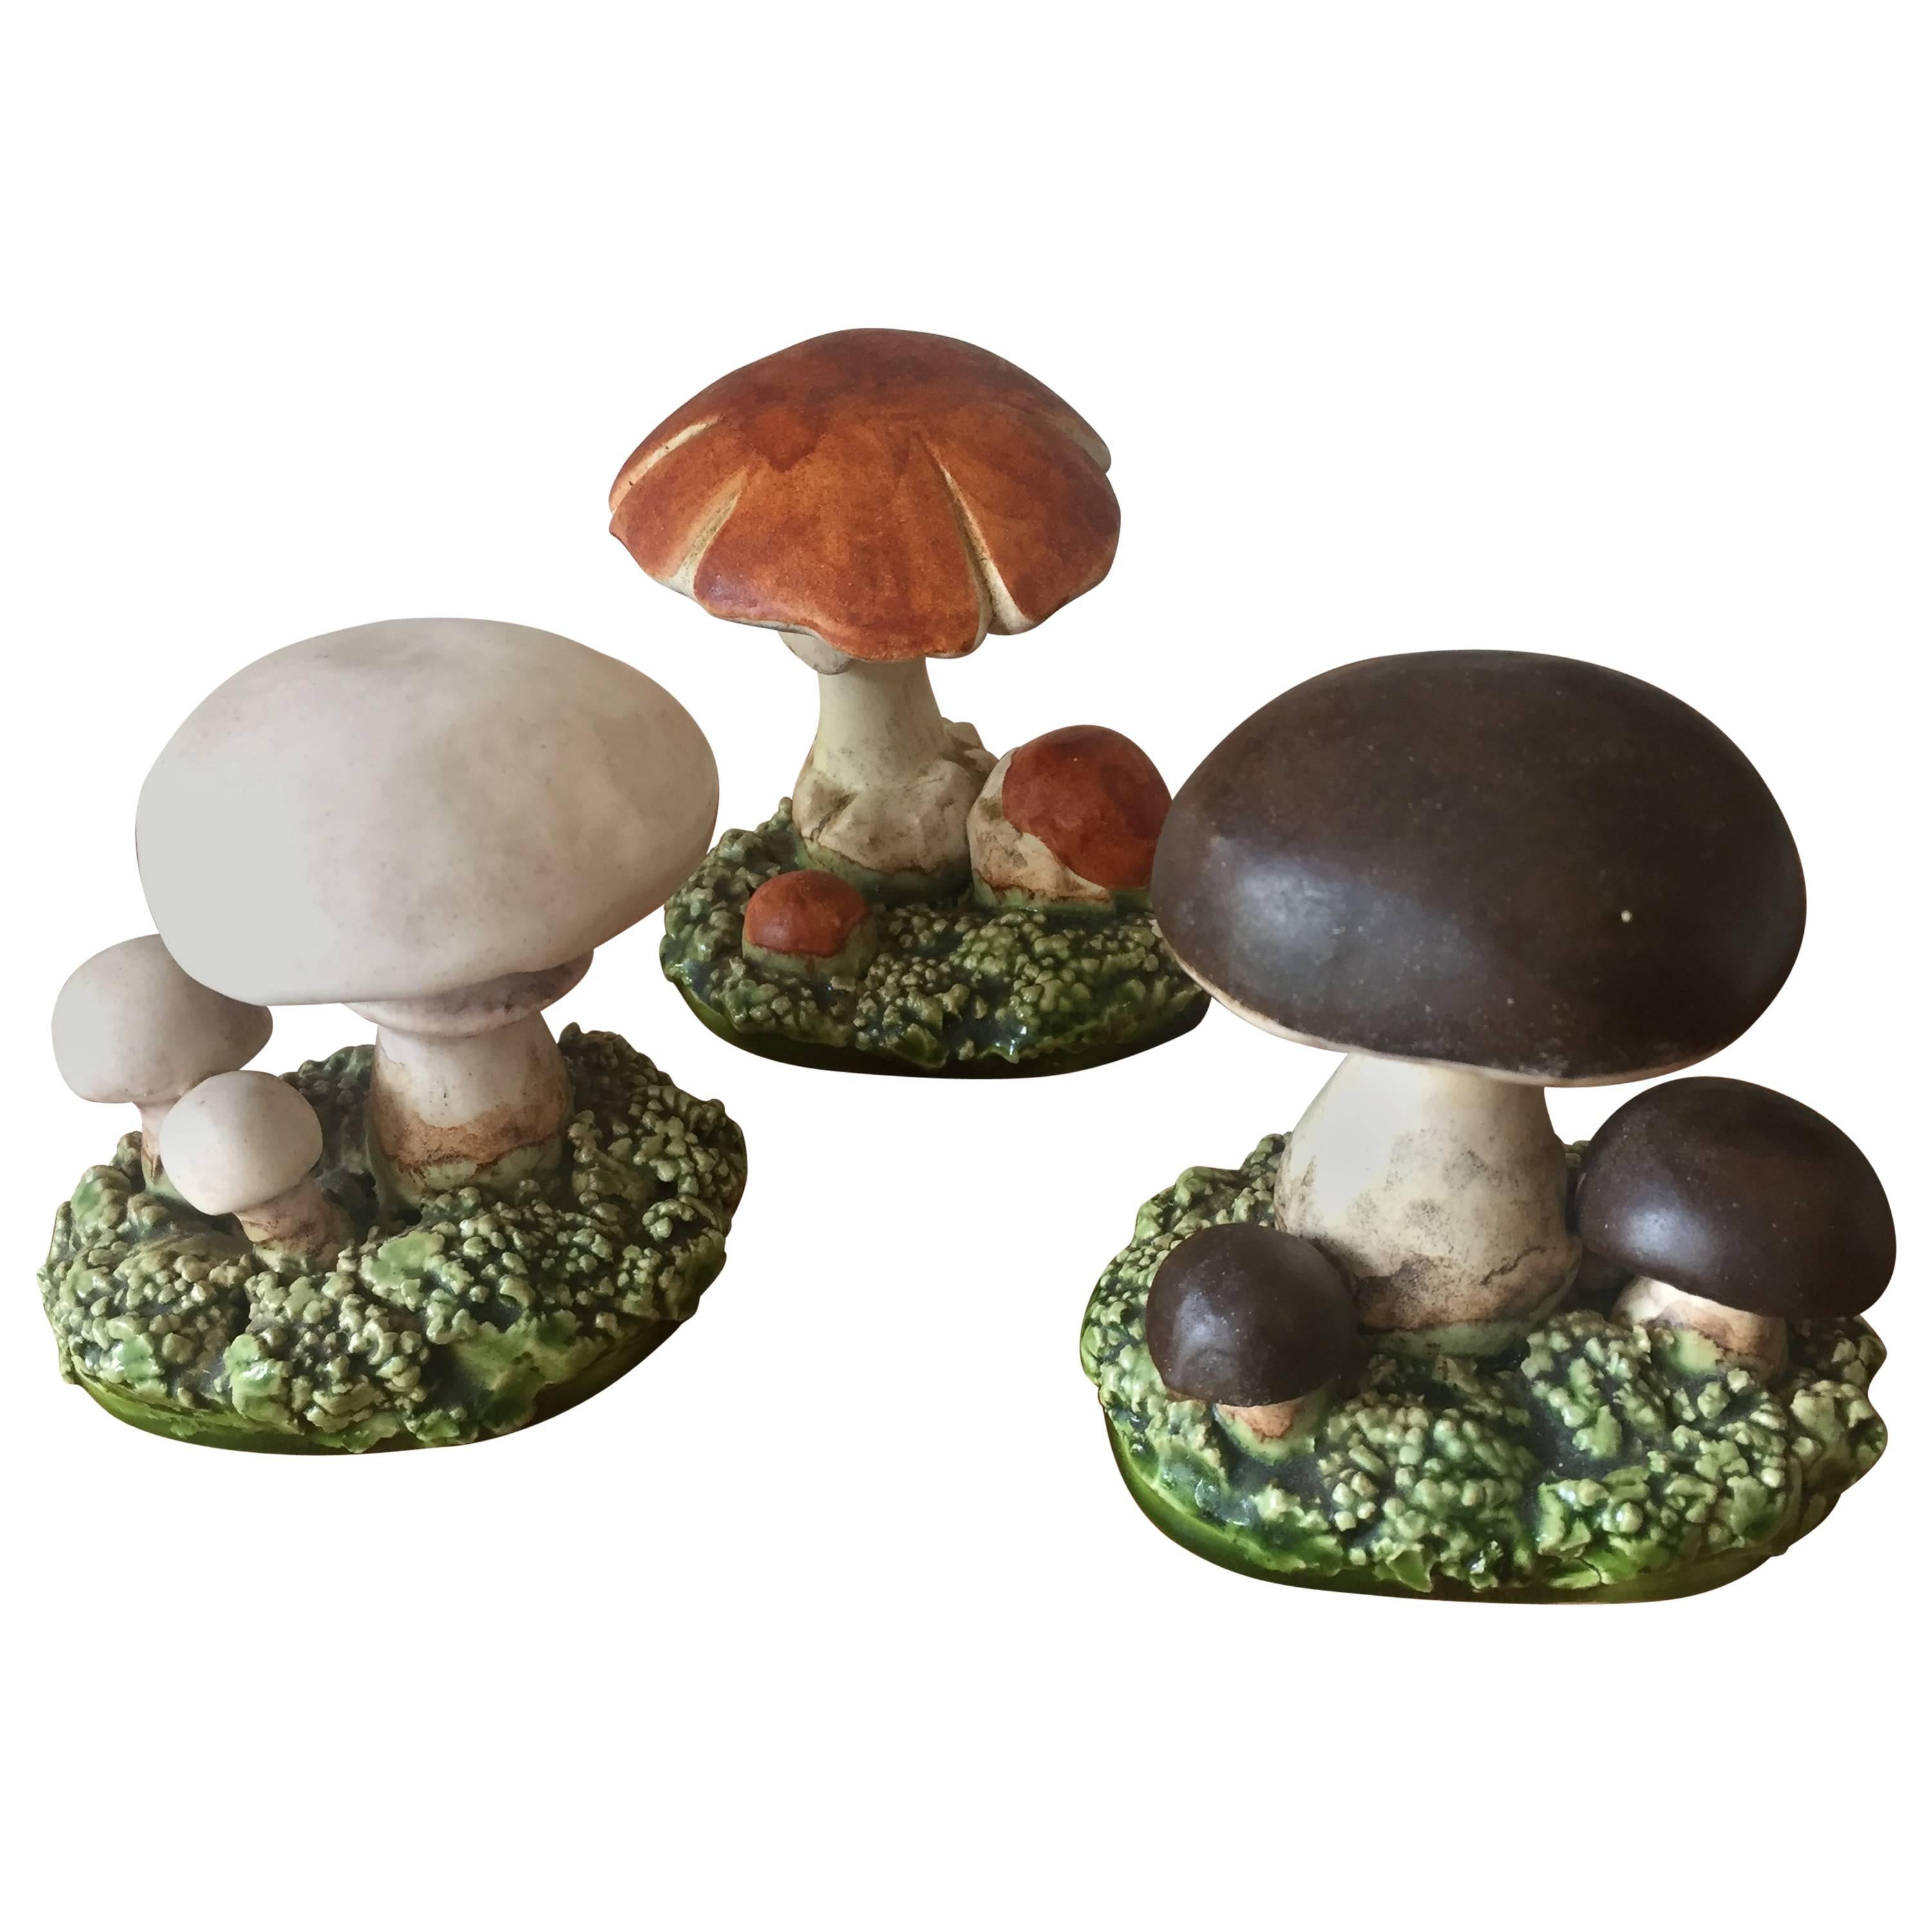 Curious Set of Mid-Century Naturalistic French Ceramic Mushrooms Marcel Guillot